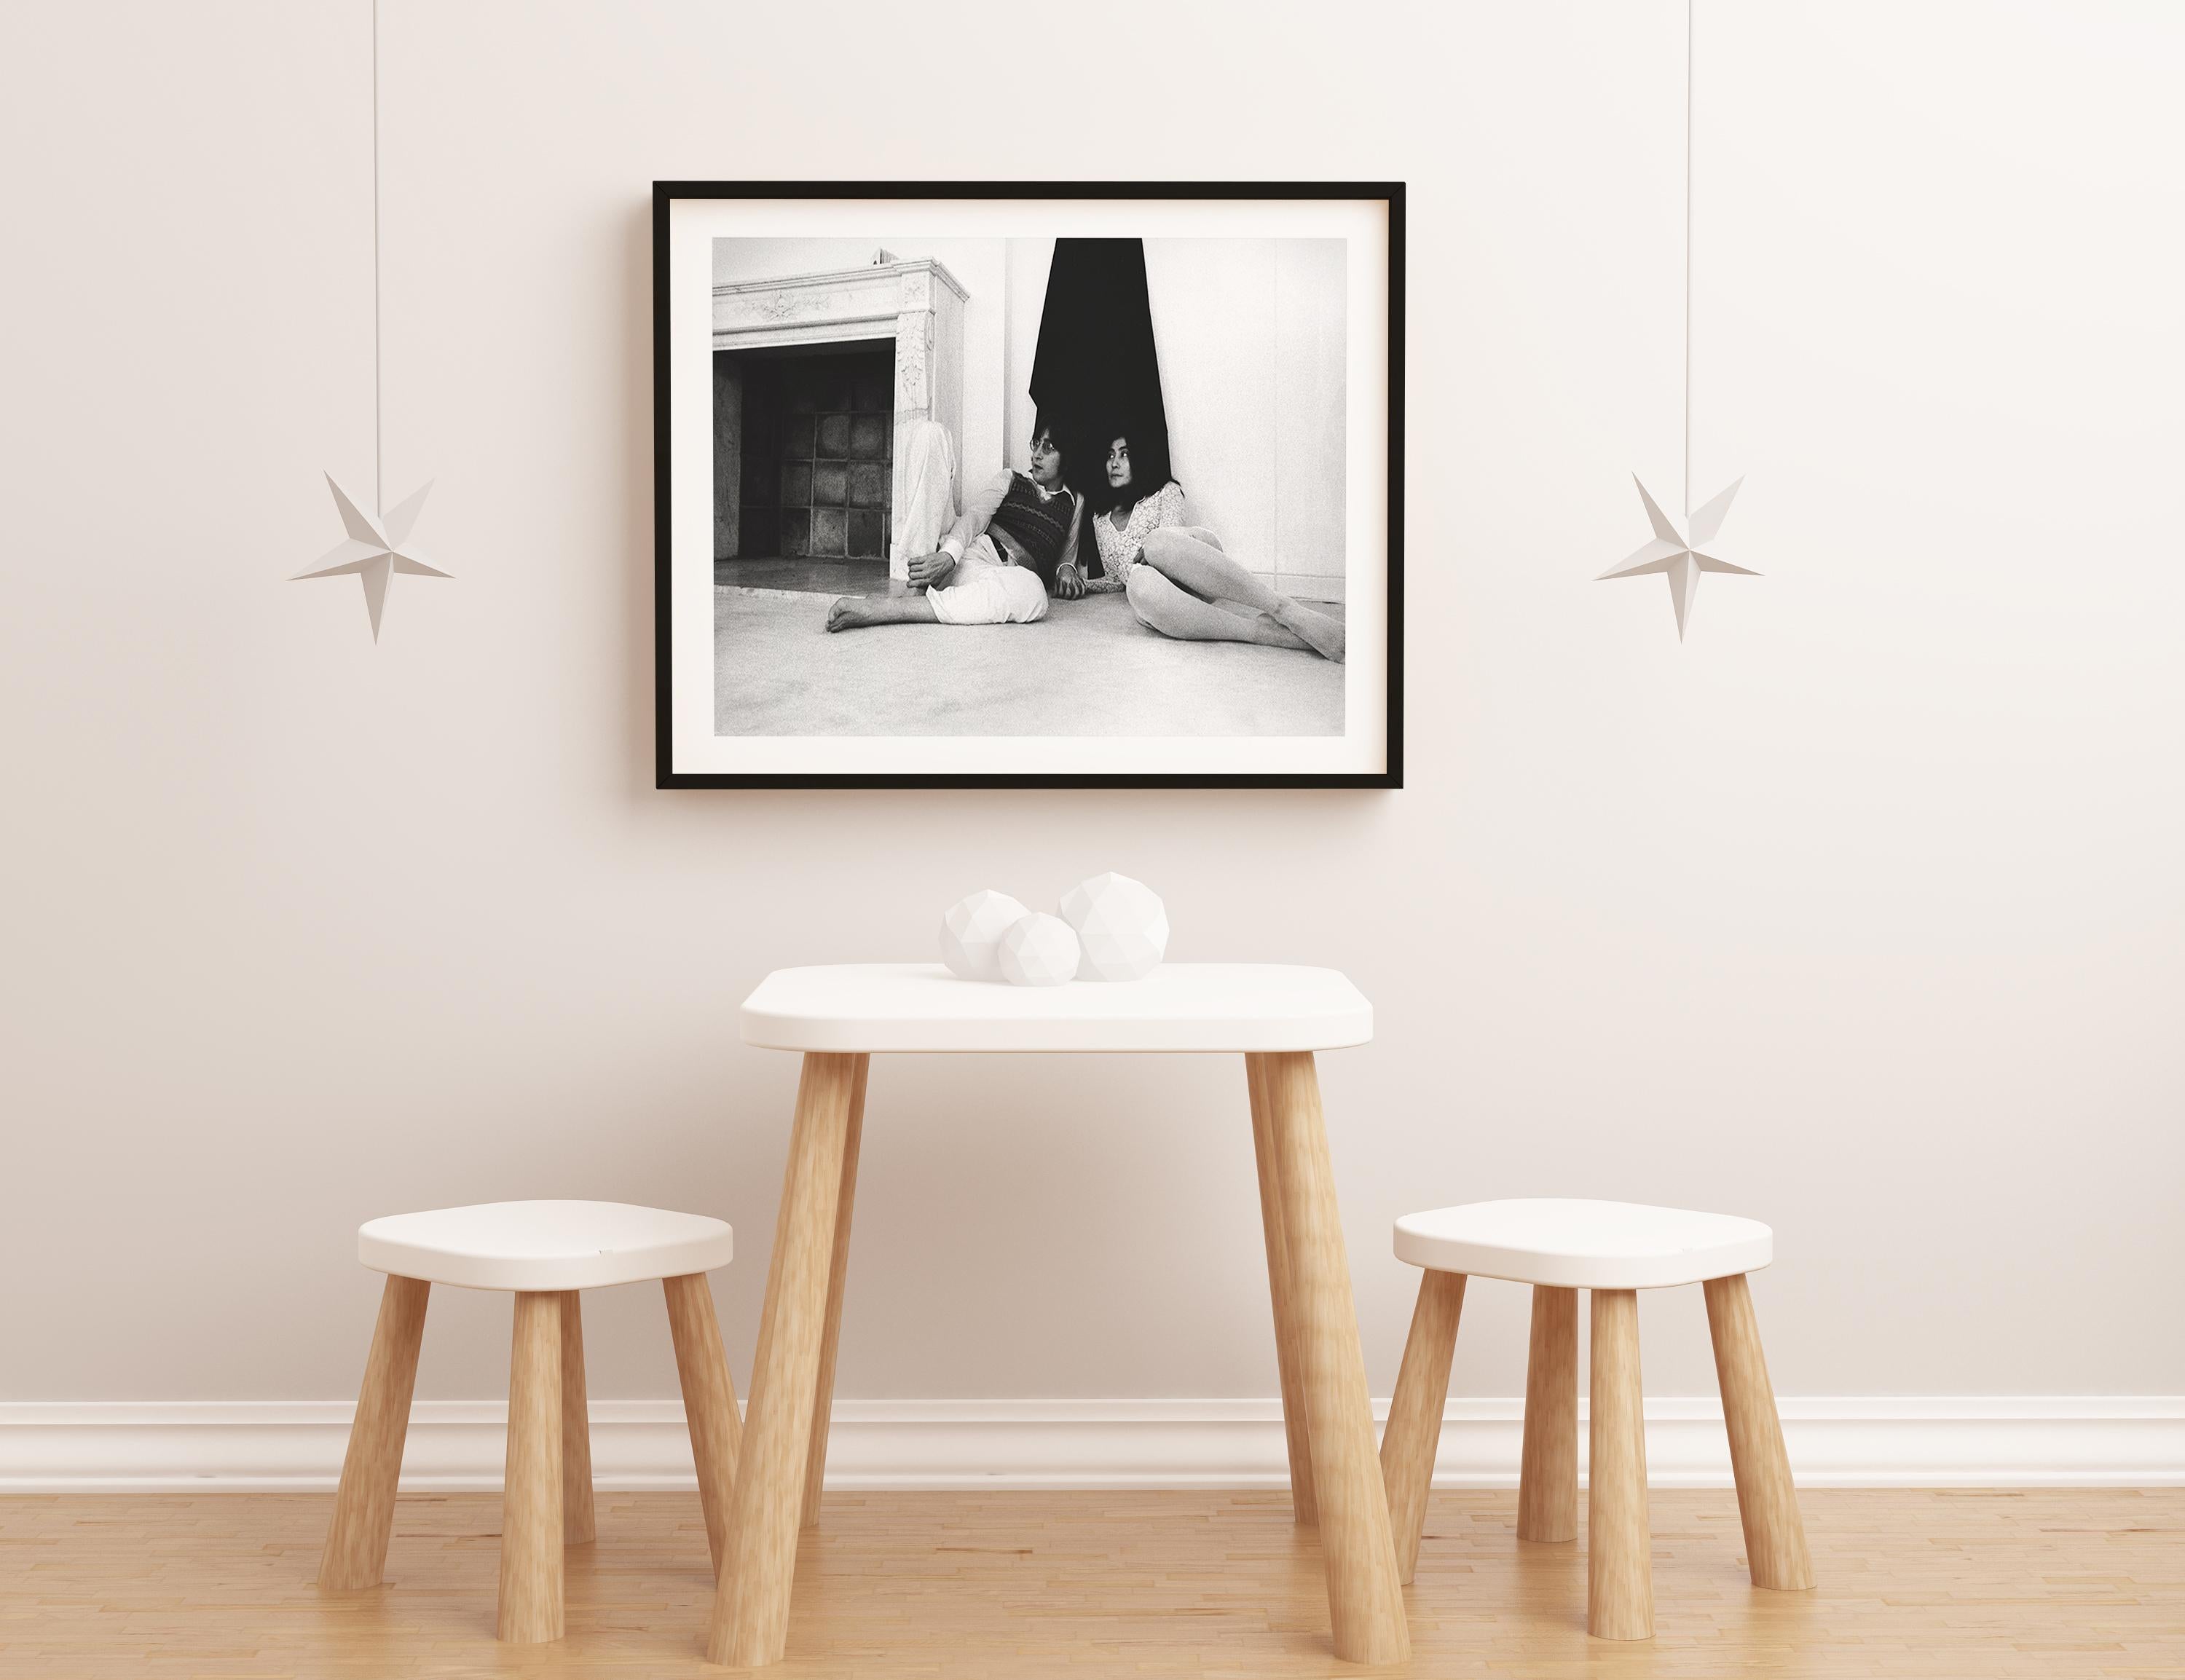 John Lennon and Yoko Ono: Hanging Out Globe Photos Fine Art Print - Gray Portrait Photograph by Unknown